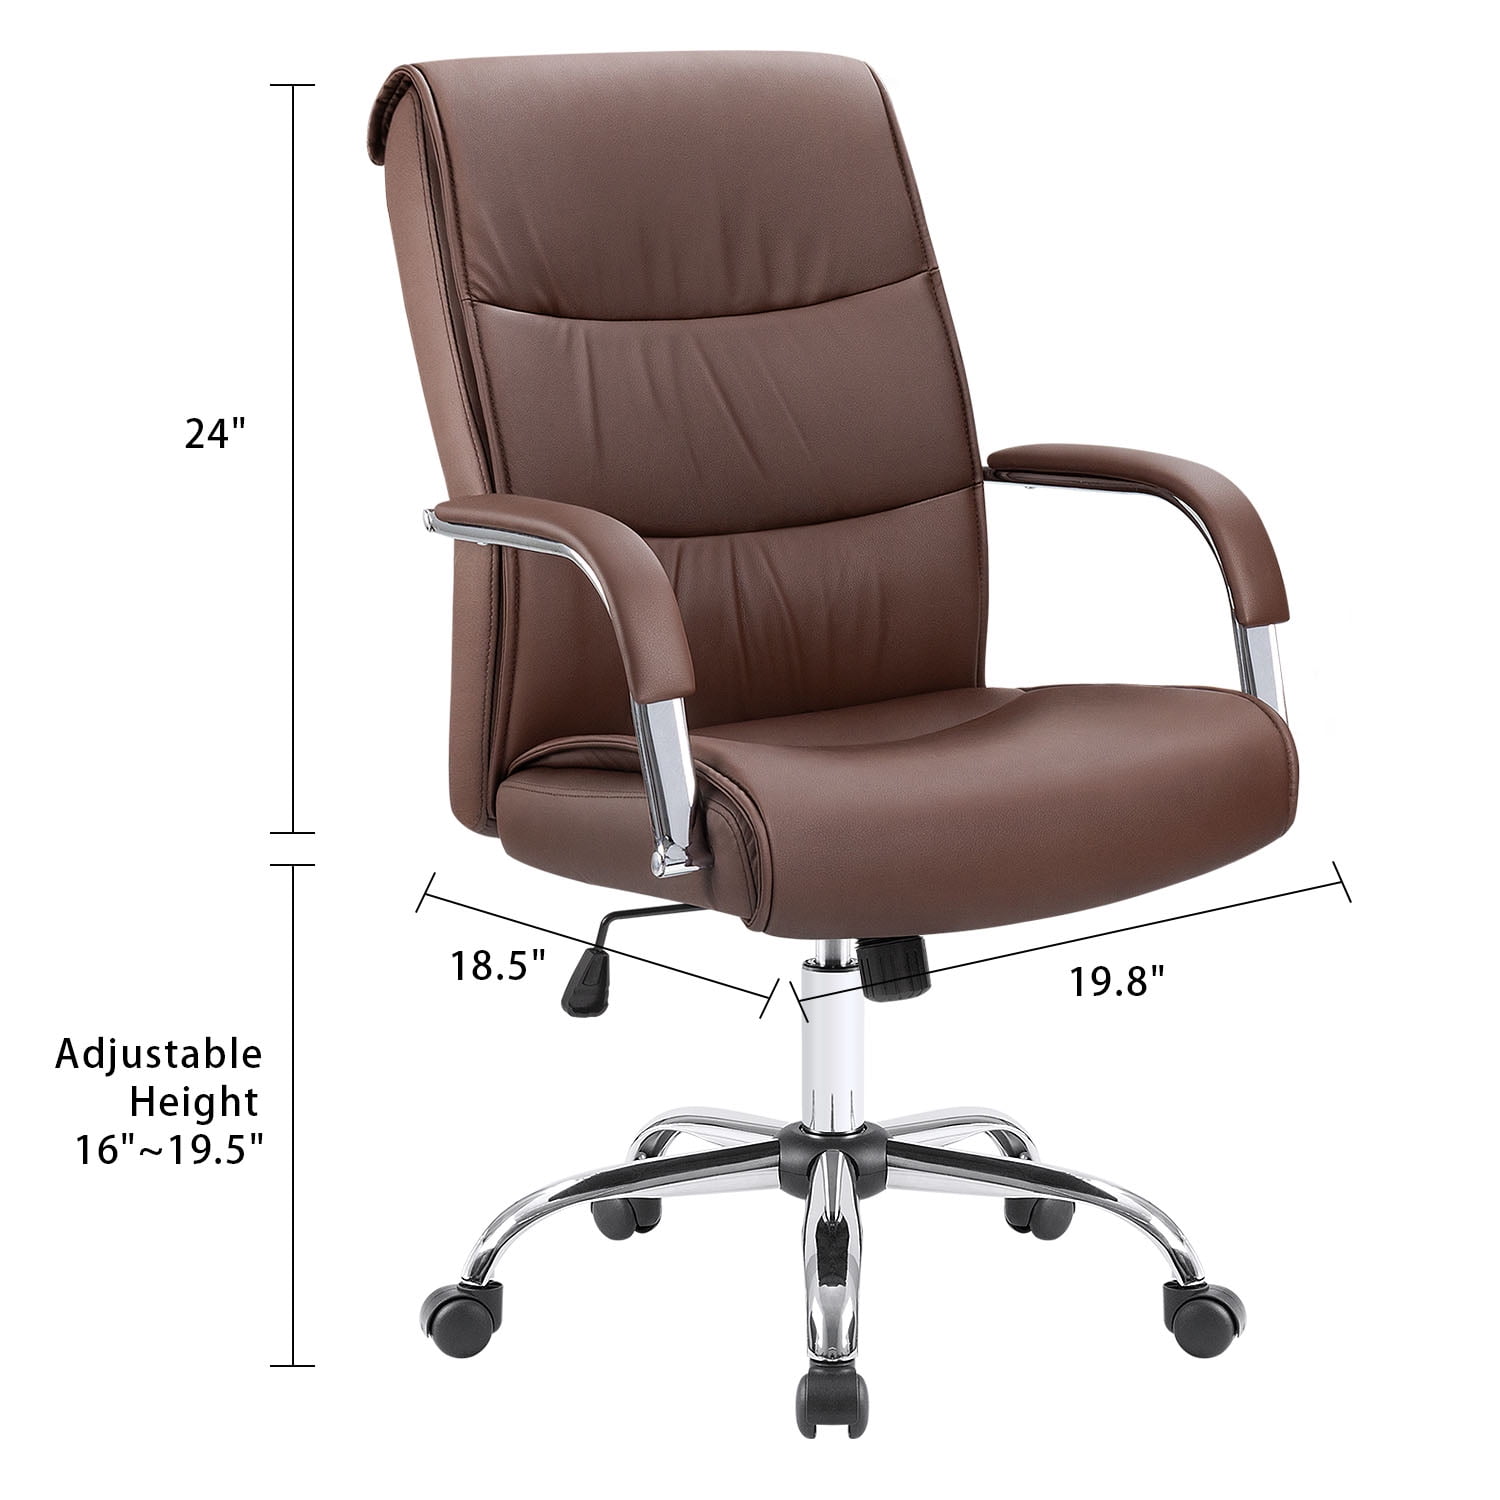 Lacoo Faux Leather High-Back Executive Office Chair with Lumbar